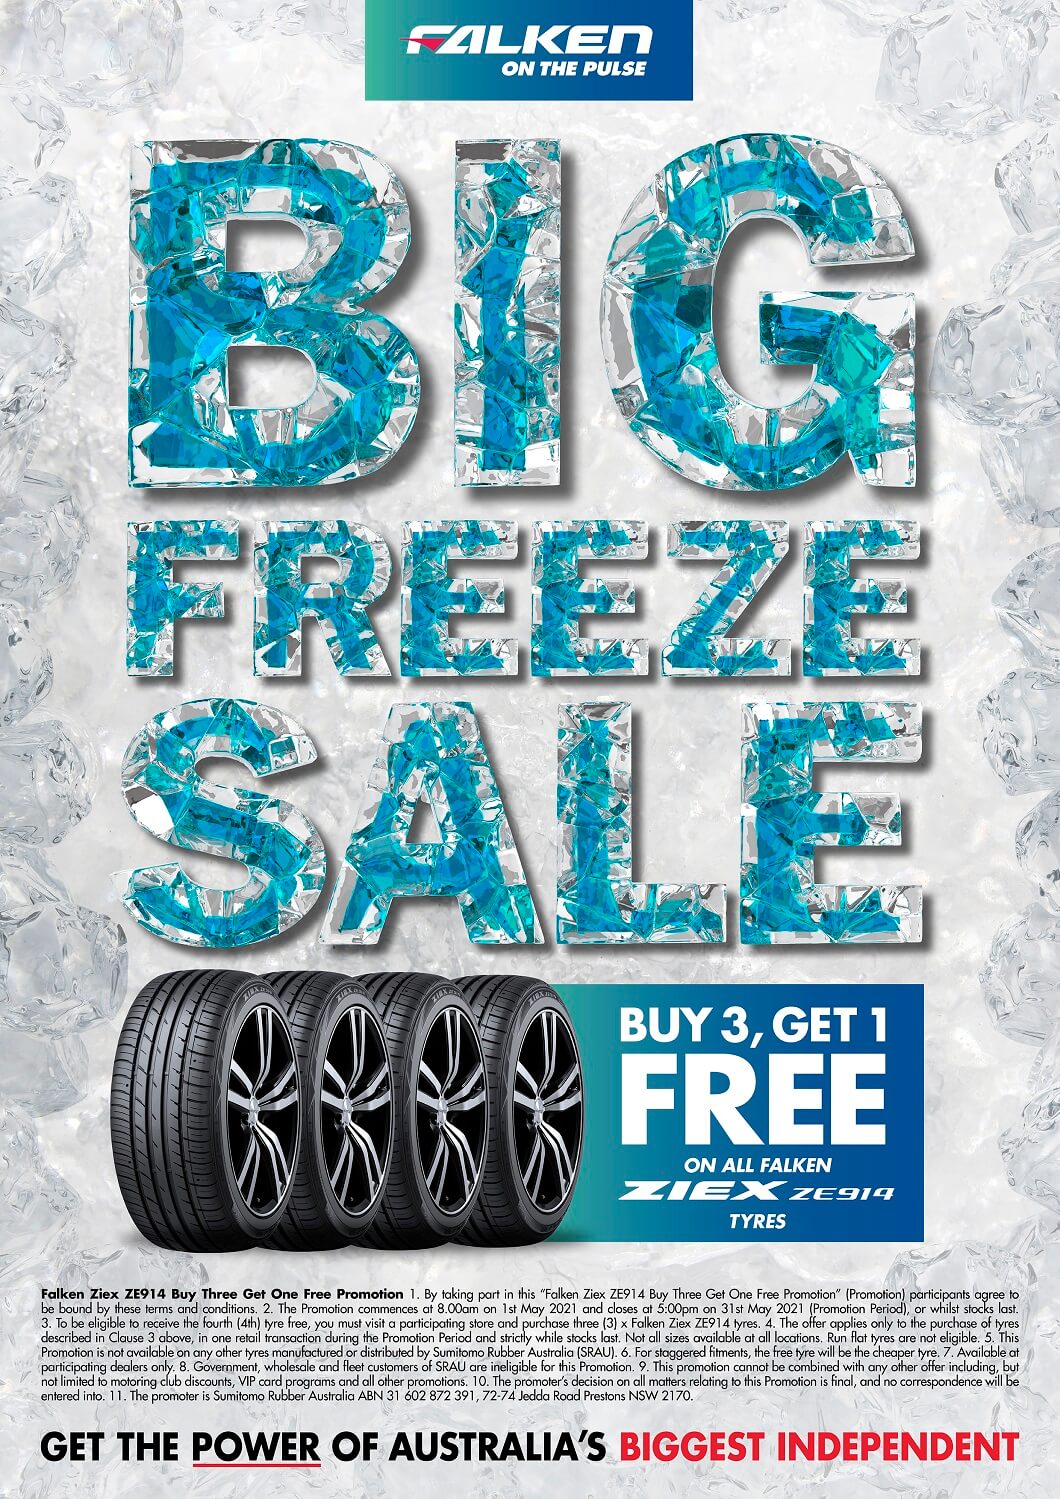 To be eligible, you must visit a participating store and purchase (3) x Falken Ziex ZE914 tyres.